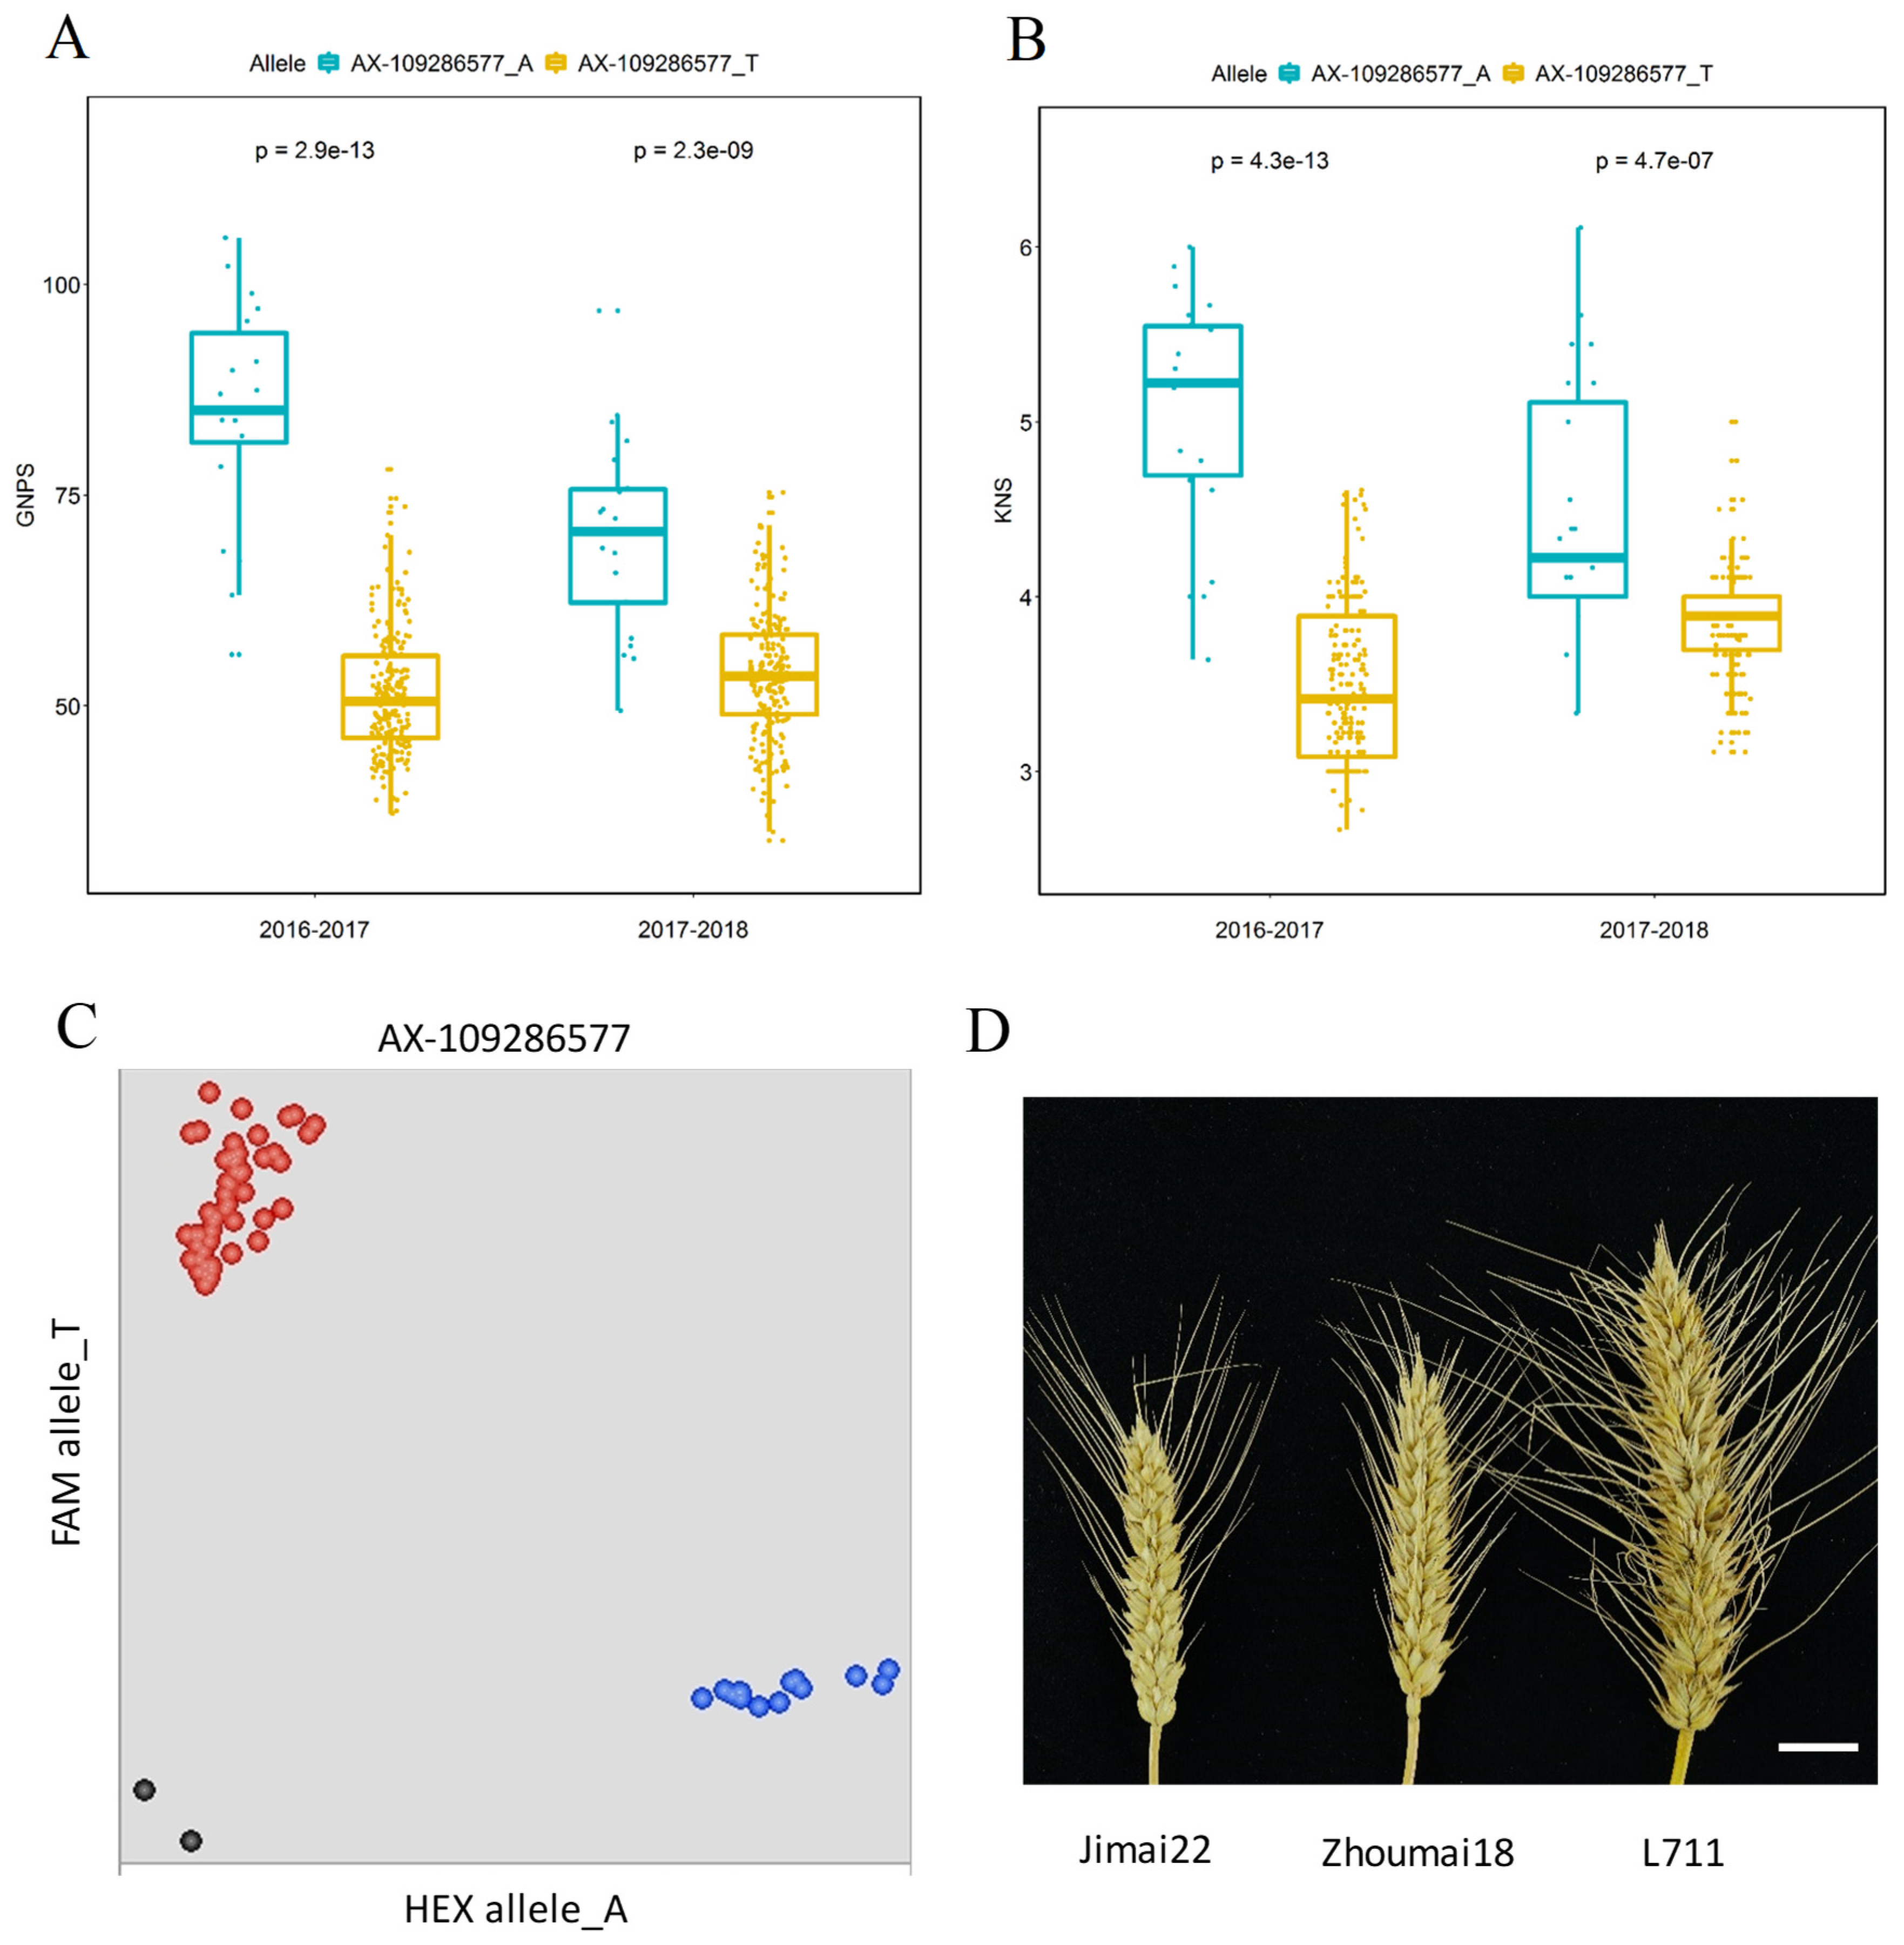 Rice spikelet numbers (a), ear length (b), numbers of grains per spike